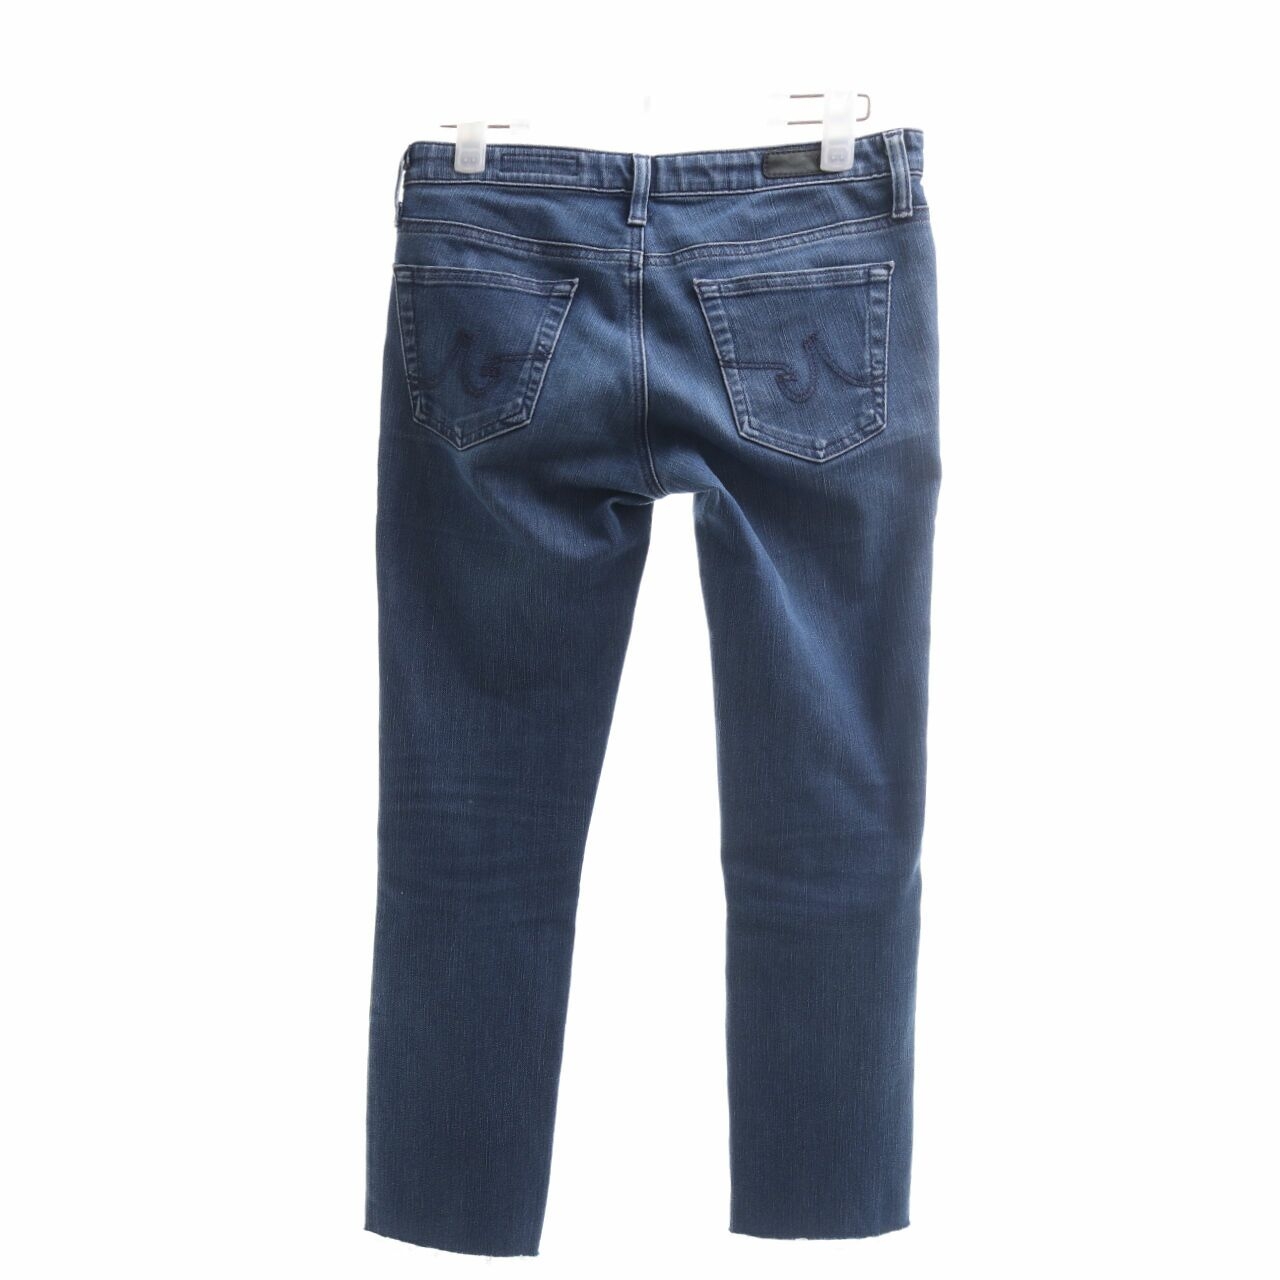 Adriano Goldschmied Dark Blue Washed Long Pants